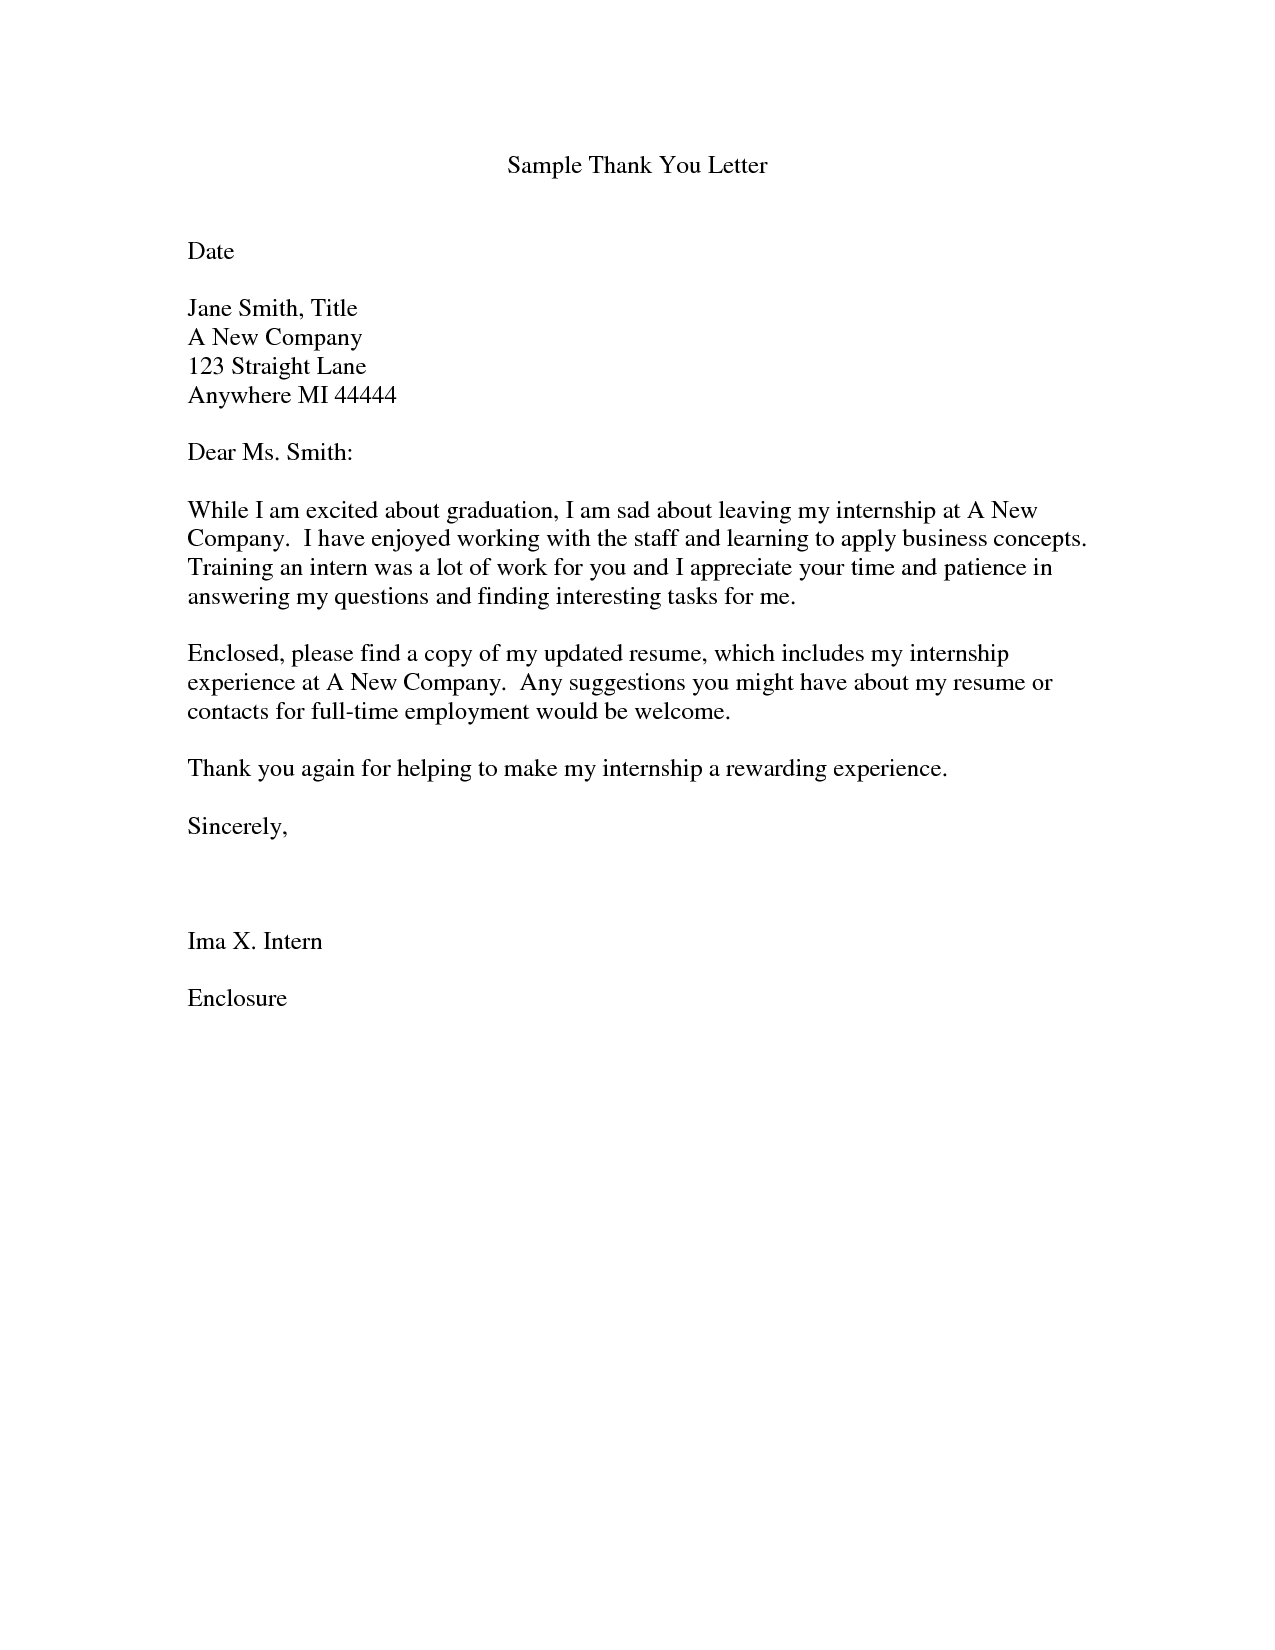 resume thank you letter template